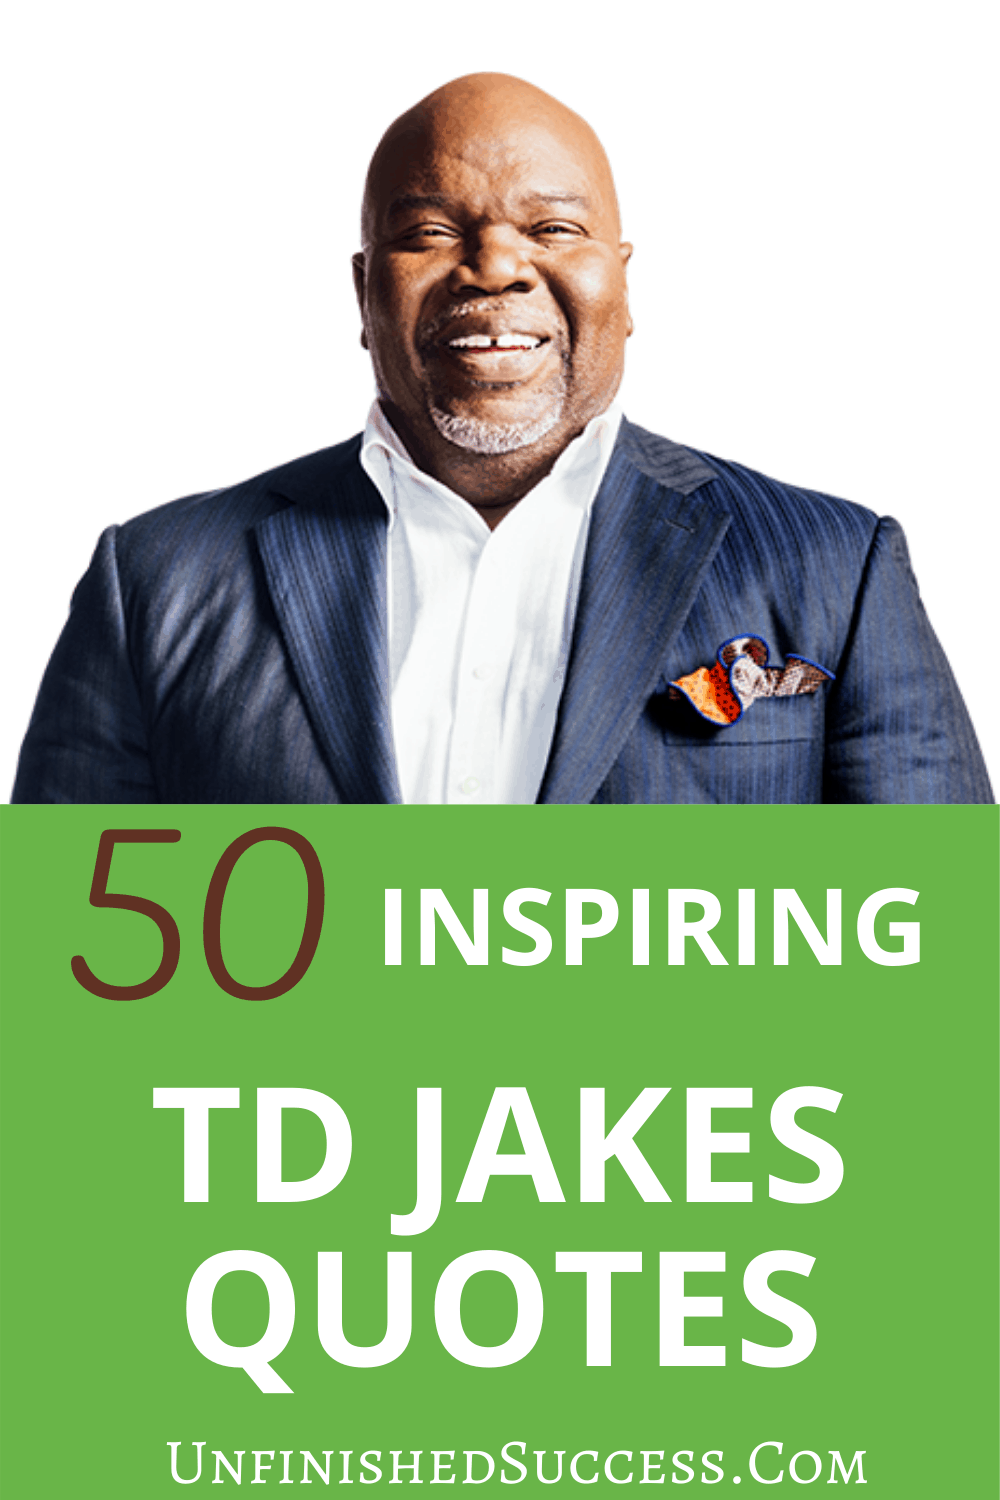 50 Inspirational TD Jakes Quotes | Unfinished Success